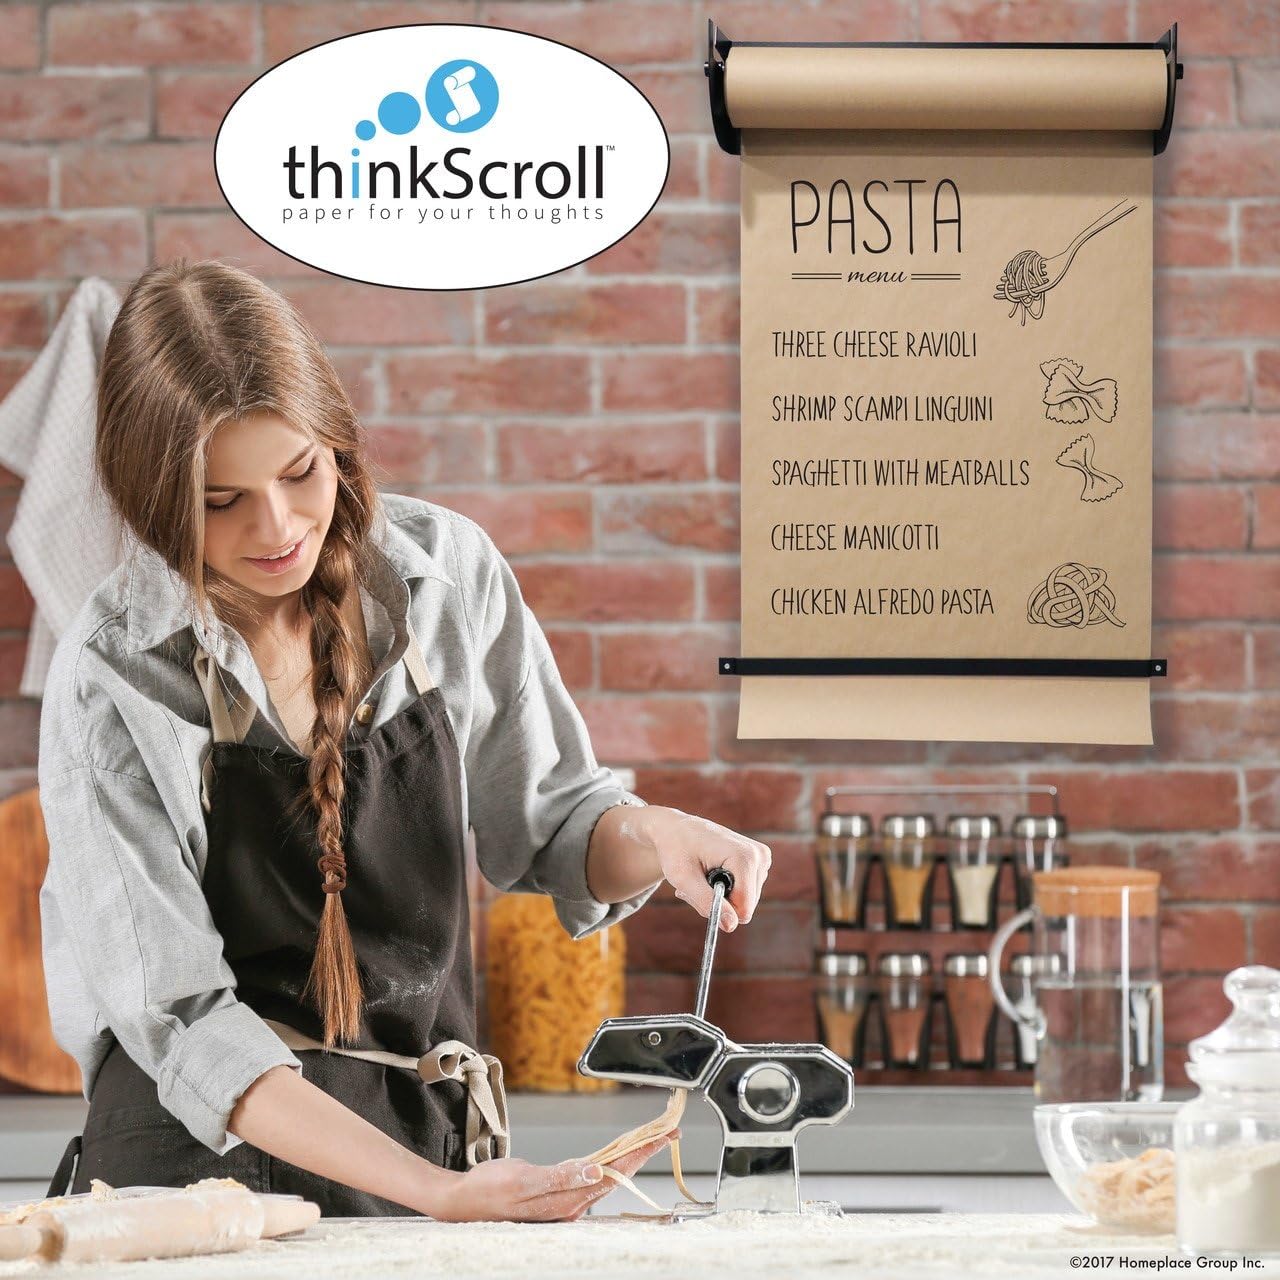 Case of 6 thinkScroll® 24" Wall-Mounted Paper Roll Holders & Dispensers